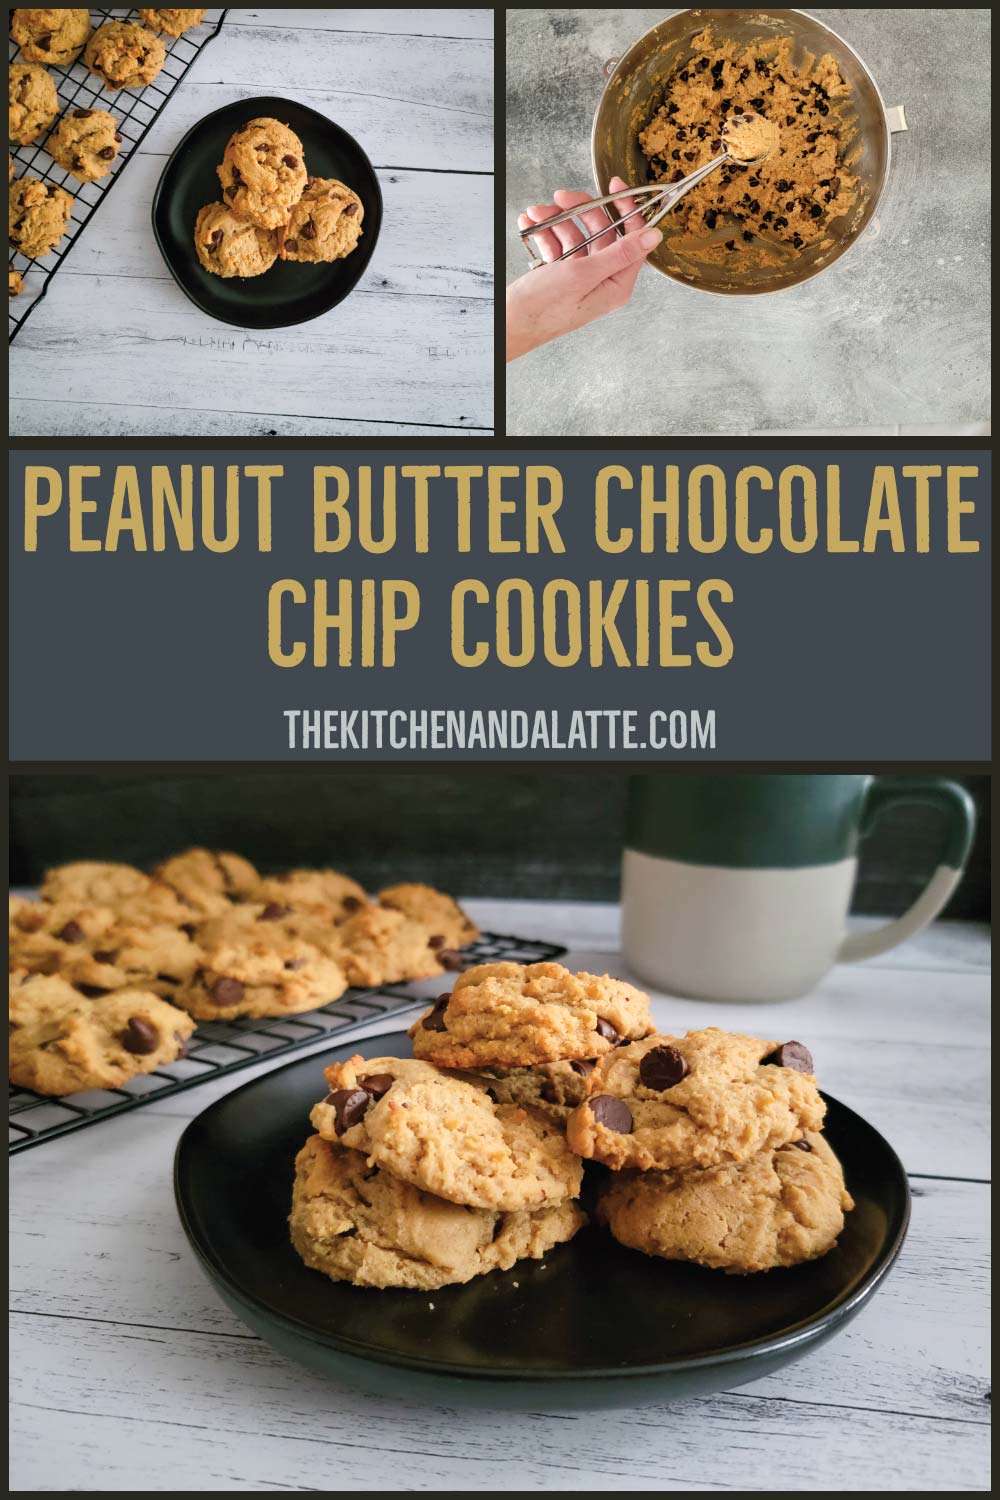 Peanut butter chocolate chip cookies Pinterest graphic. Cookies on a plate with some cookies on a cooling rack and cookie dough in a mixing bowl being scooped out with a cookie scoop.